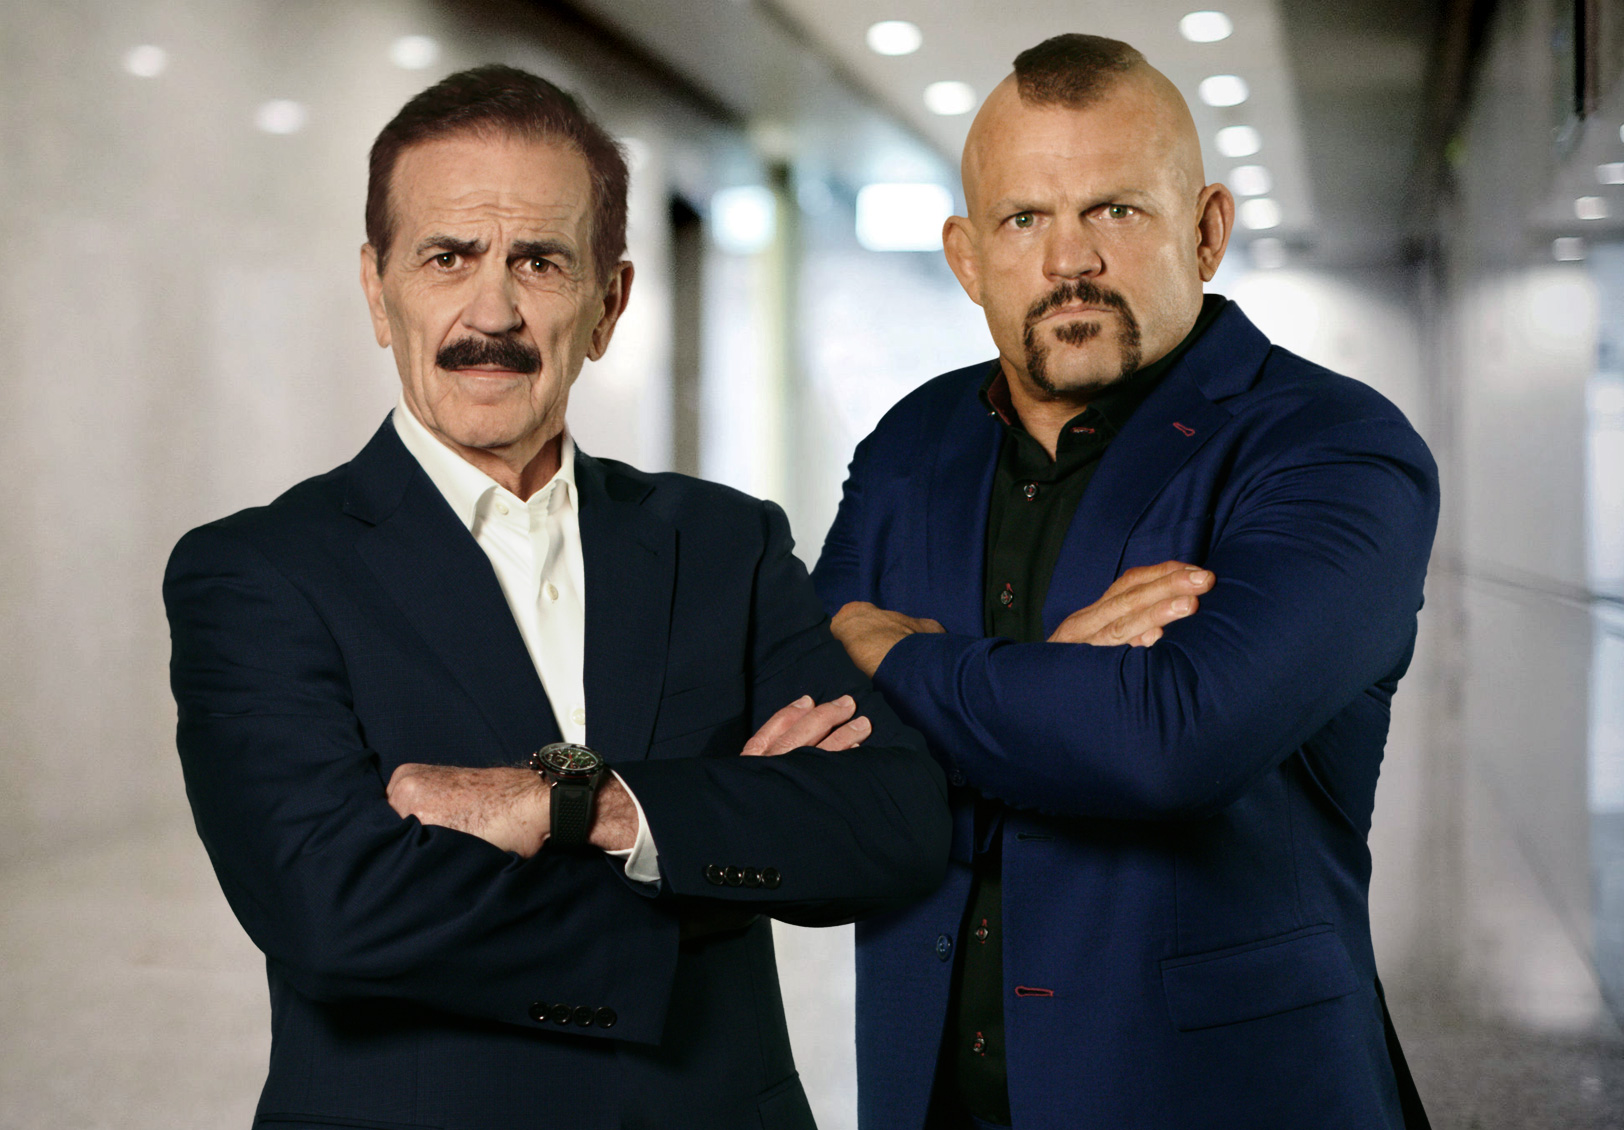 Announcing Our New Commercial with Legendary MMA Fighter Chuck Liddell!